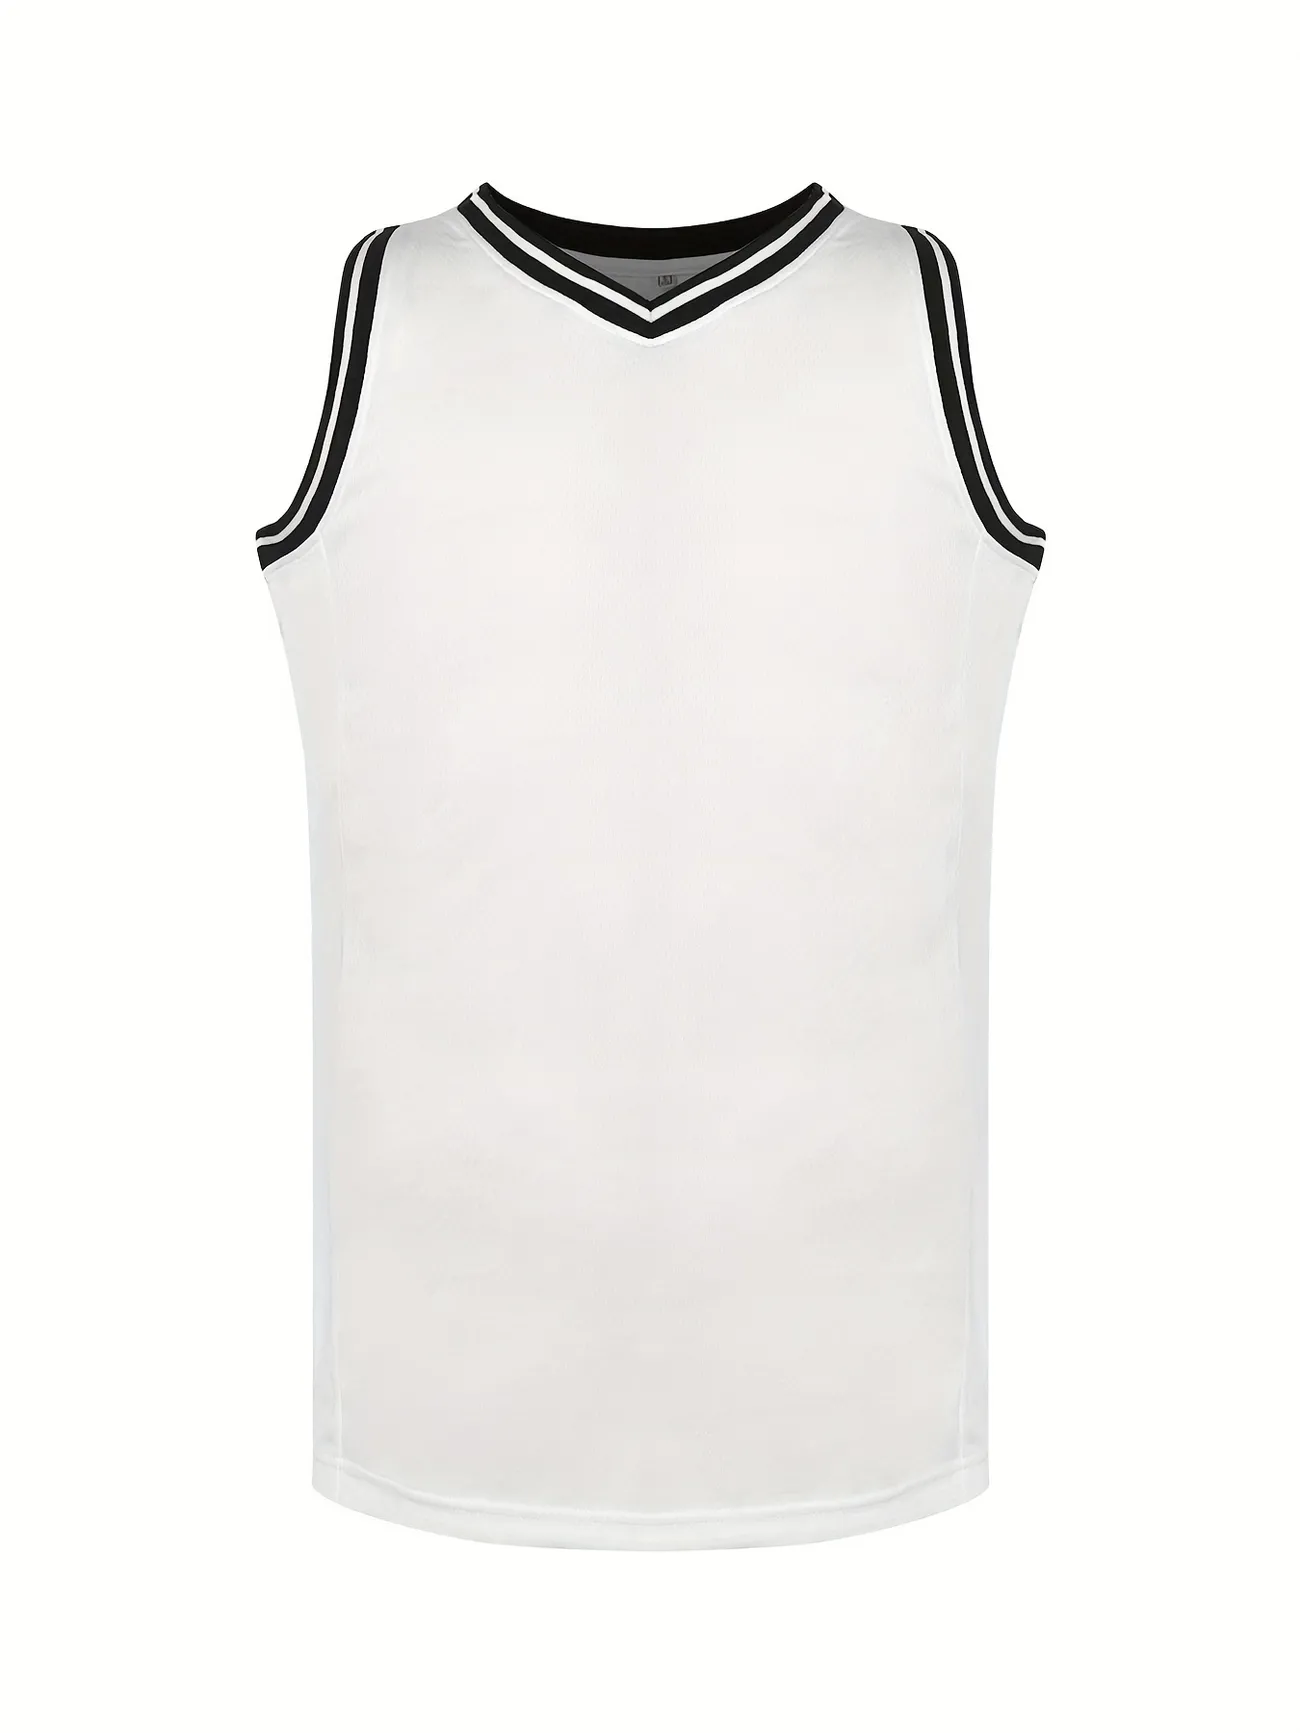 Men's Solid Basketball Jersey, Active Slightly Stretch Breathable Moisture  Wicking Sleeveless Basketball Shirt For Outdoor